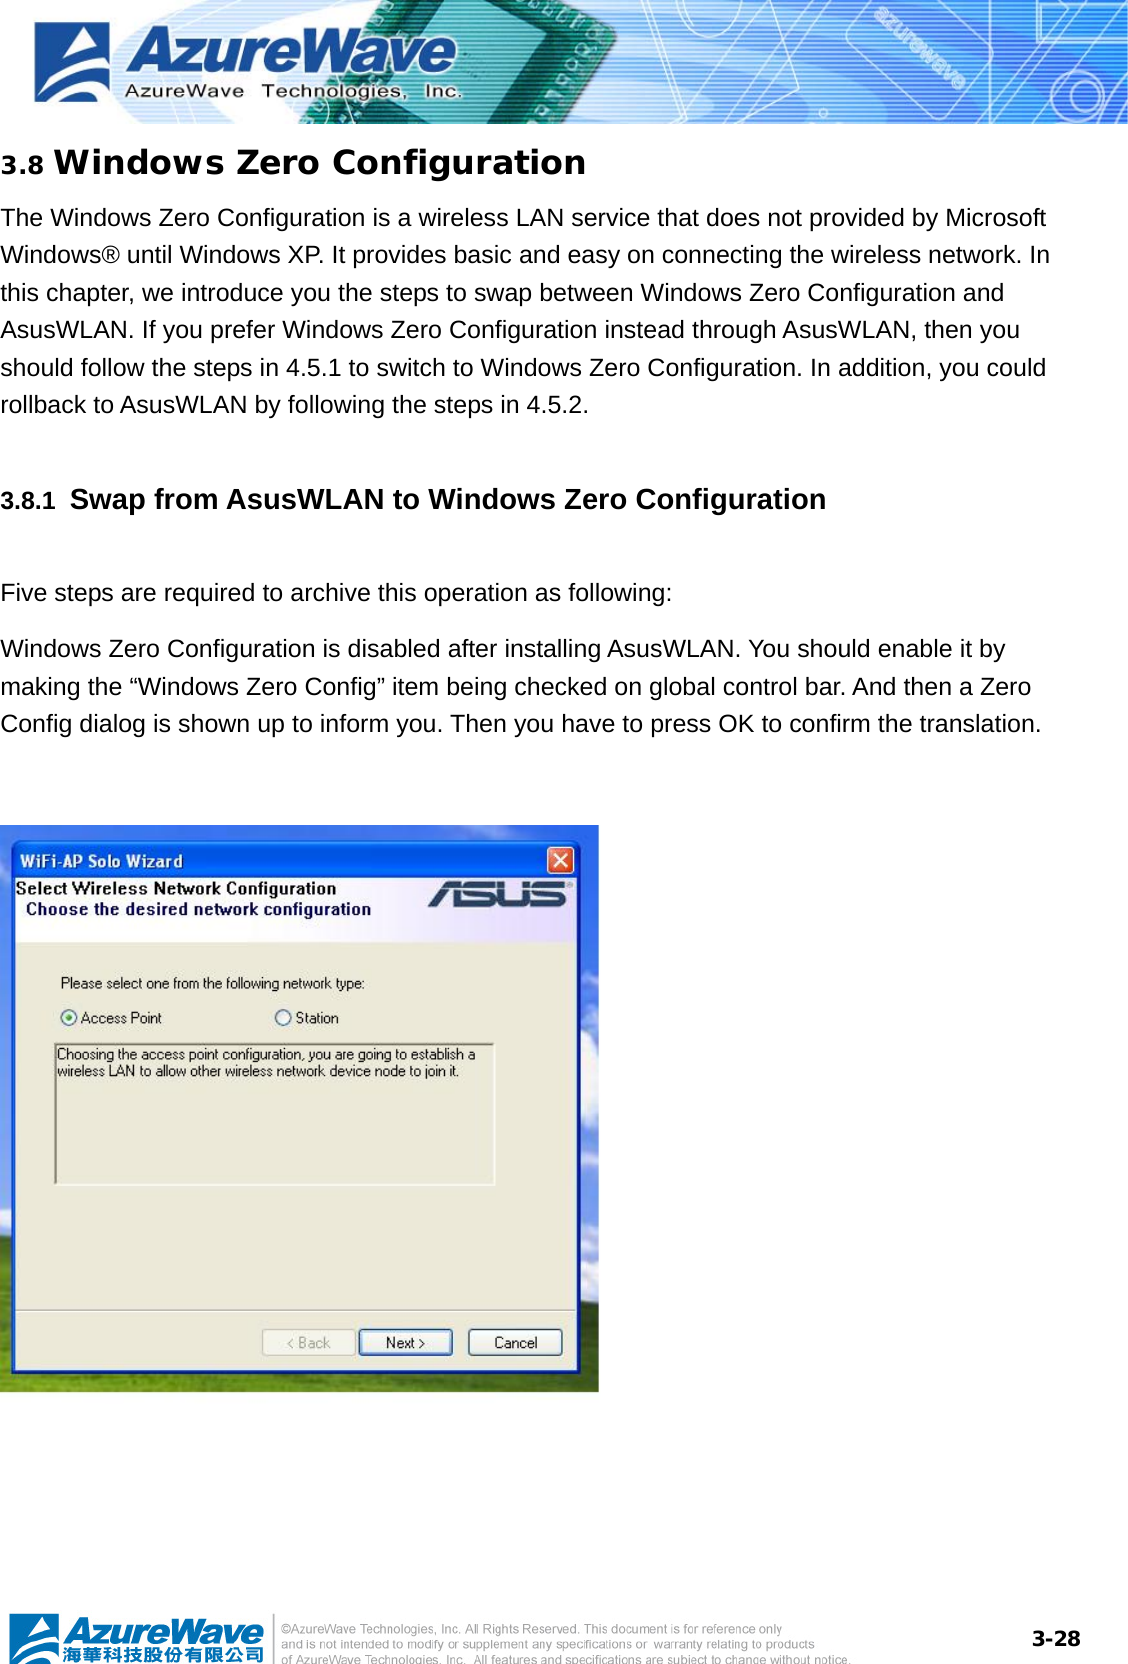  3-283.8 Windows Zero Configuration The Windows Zero Configuration is a wireless LAN service that does not provided by Microsoft Windows® until Windows XP. It provides basic and easy on connecting the wireless network. In this chapter, we introduce you the steps to swap between Windows Zero Configuration and AsusWLAN. If you prefer Windows Zero Configuration instead through AsusWLAN, then you should follow the steps in 4.5.1 to switch to Windows Zero Configuration. In addition, you could rollback to AsusWLAN by following the steps in 4.5.2. 3.8.1  Swap from AsusWLAN to Windows Zero Configuration Five steps are required to archive this operation as following: Windows Zero Configuration is disabled after installing AsusWLAN. You should enable it by making the “Windows Zero Config” item being checked on global control bar. And then a Zero Config dialog is shown up to inform you. Then you have to press OK to confirm the translation.     